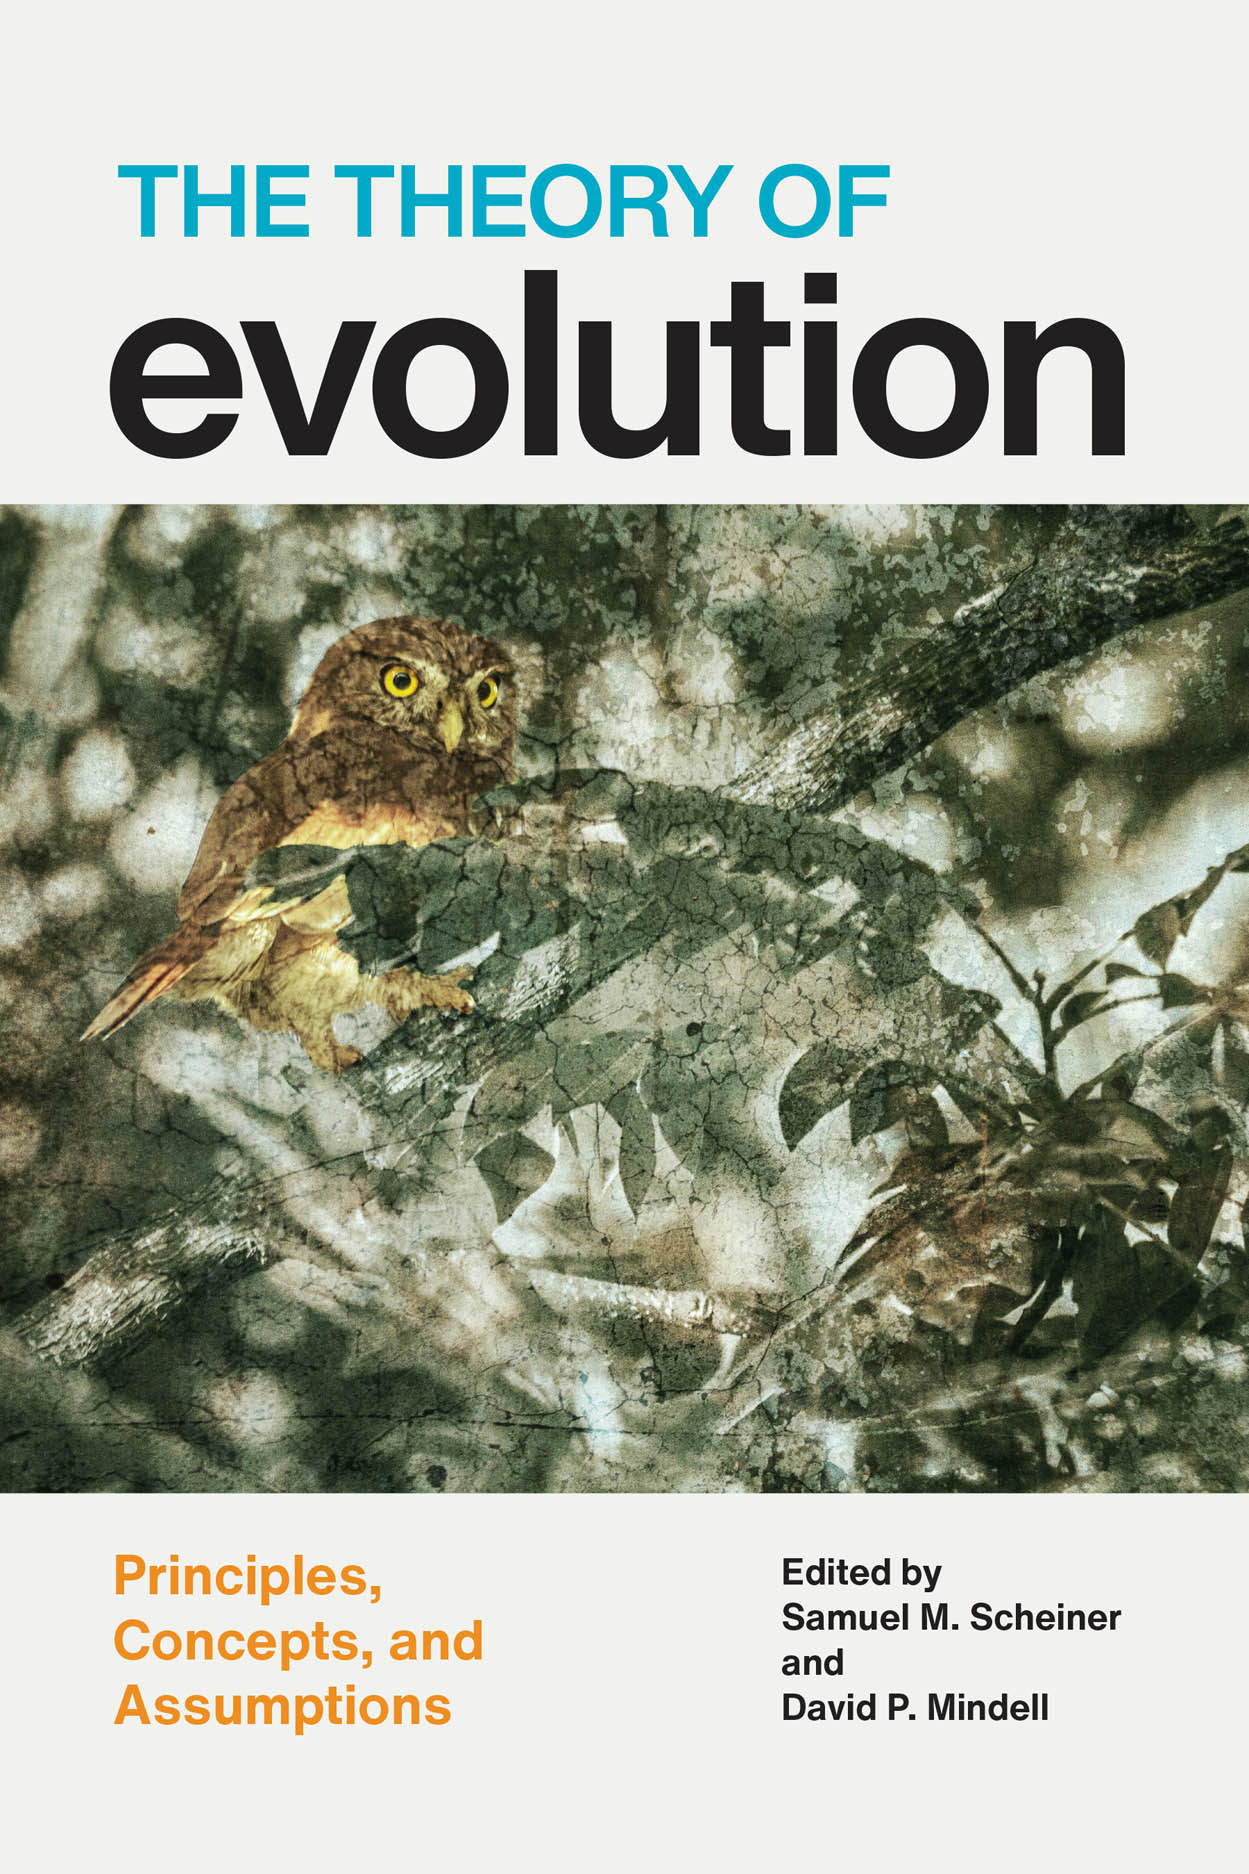 research on evolution theory